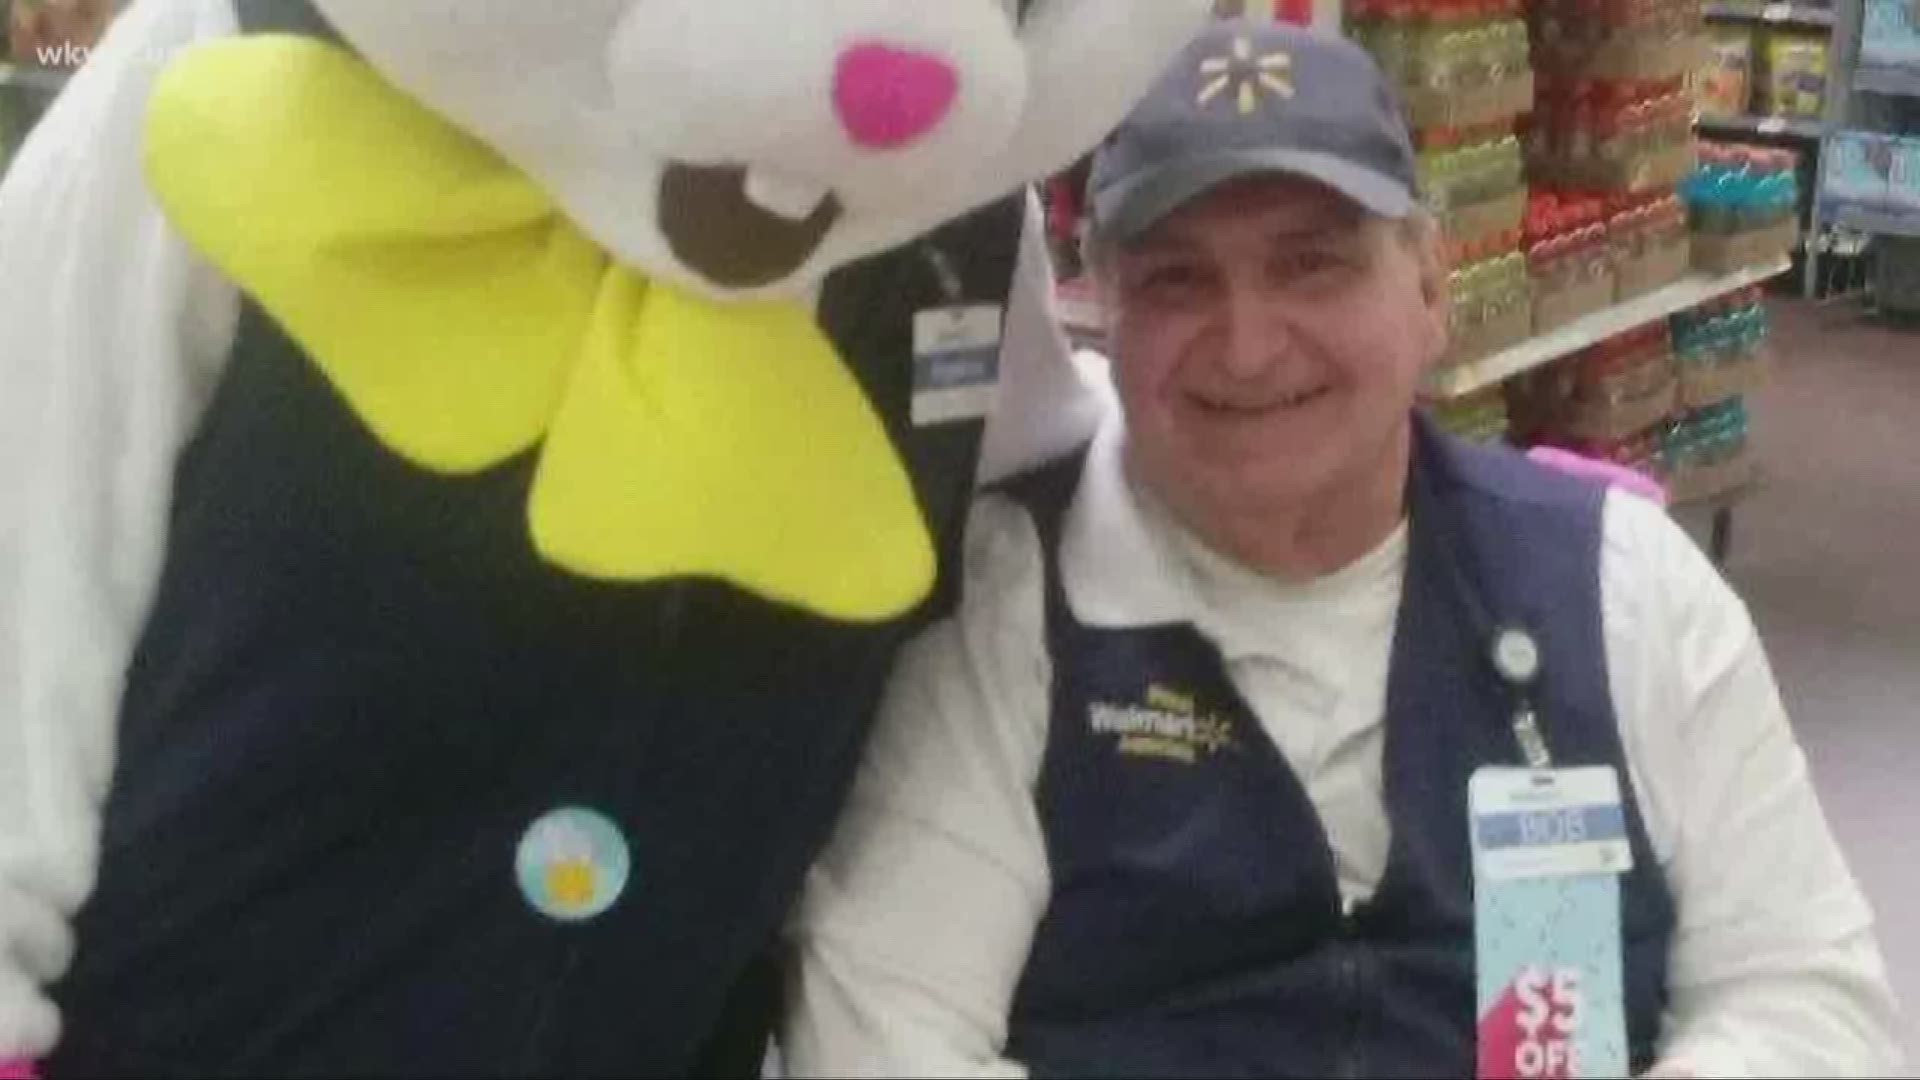 A change in company policy left Robert Caetta out of a job and, in his words, 'devastated.' Walmart has given him a different position, but he's not happy.